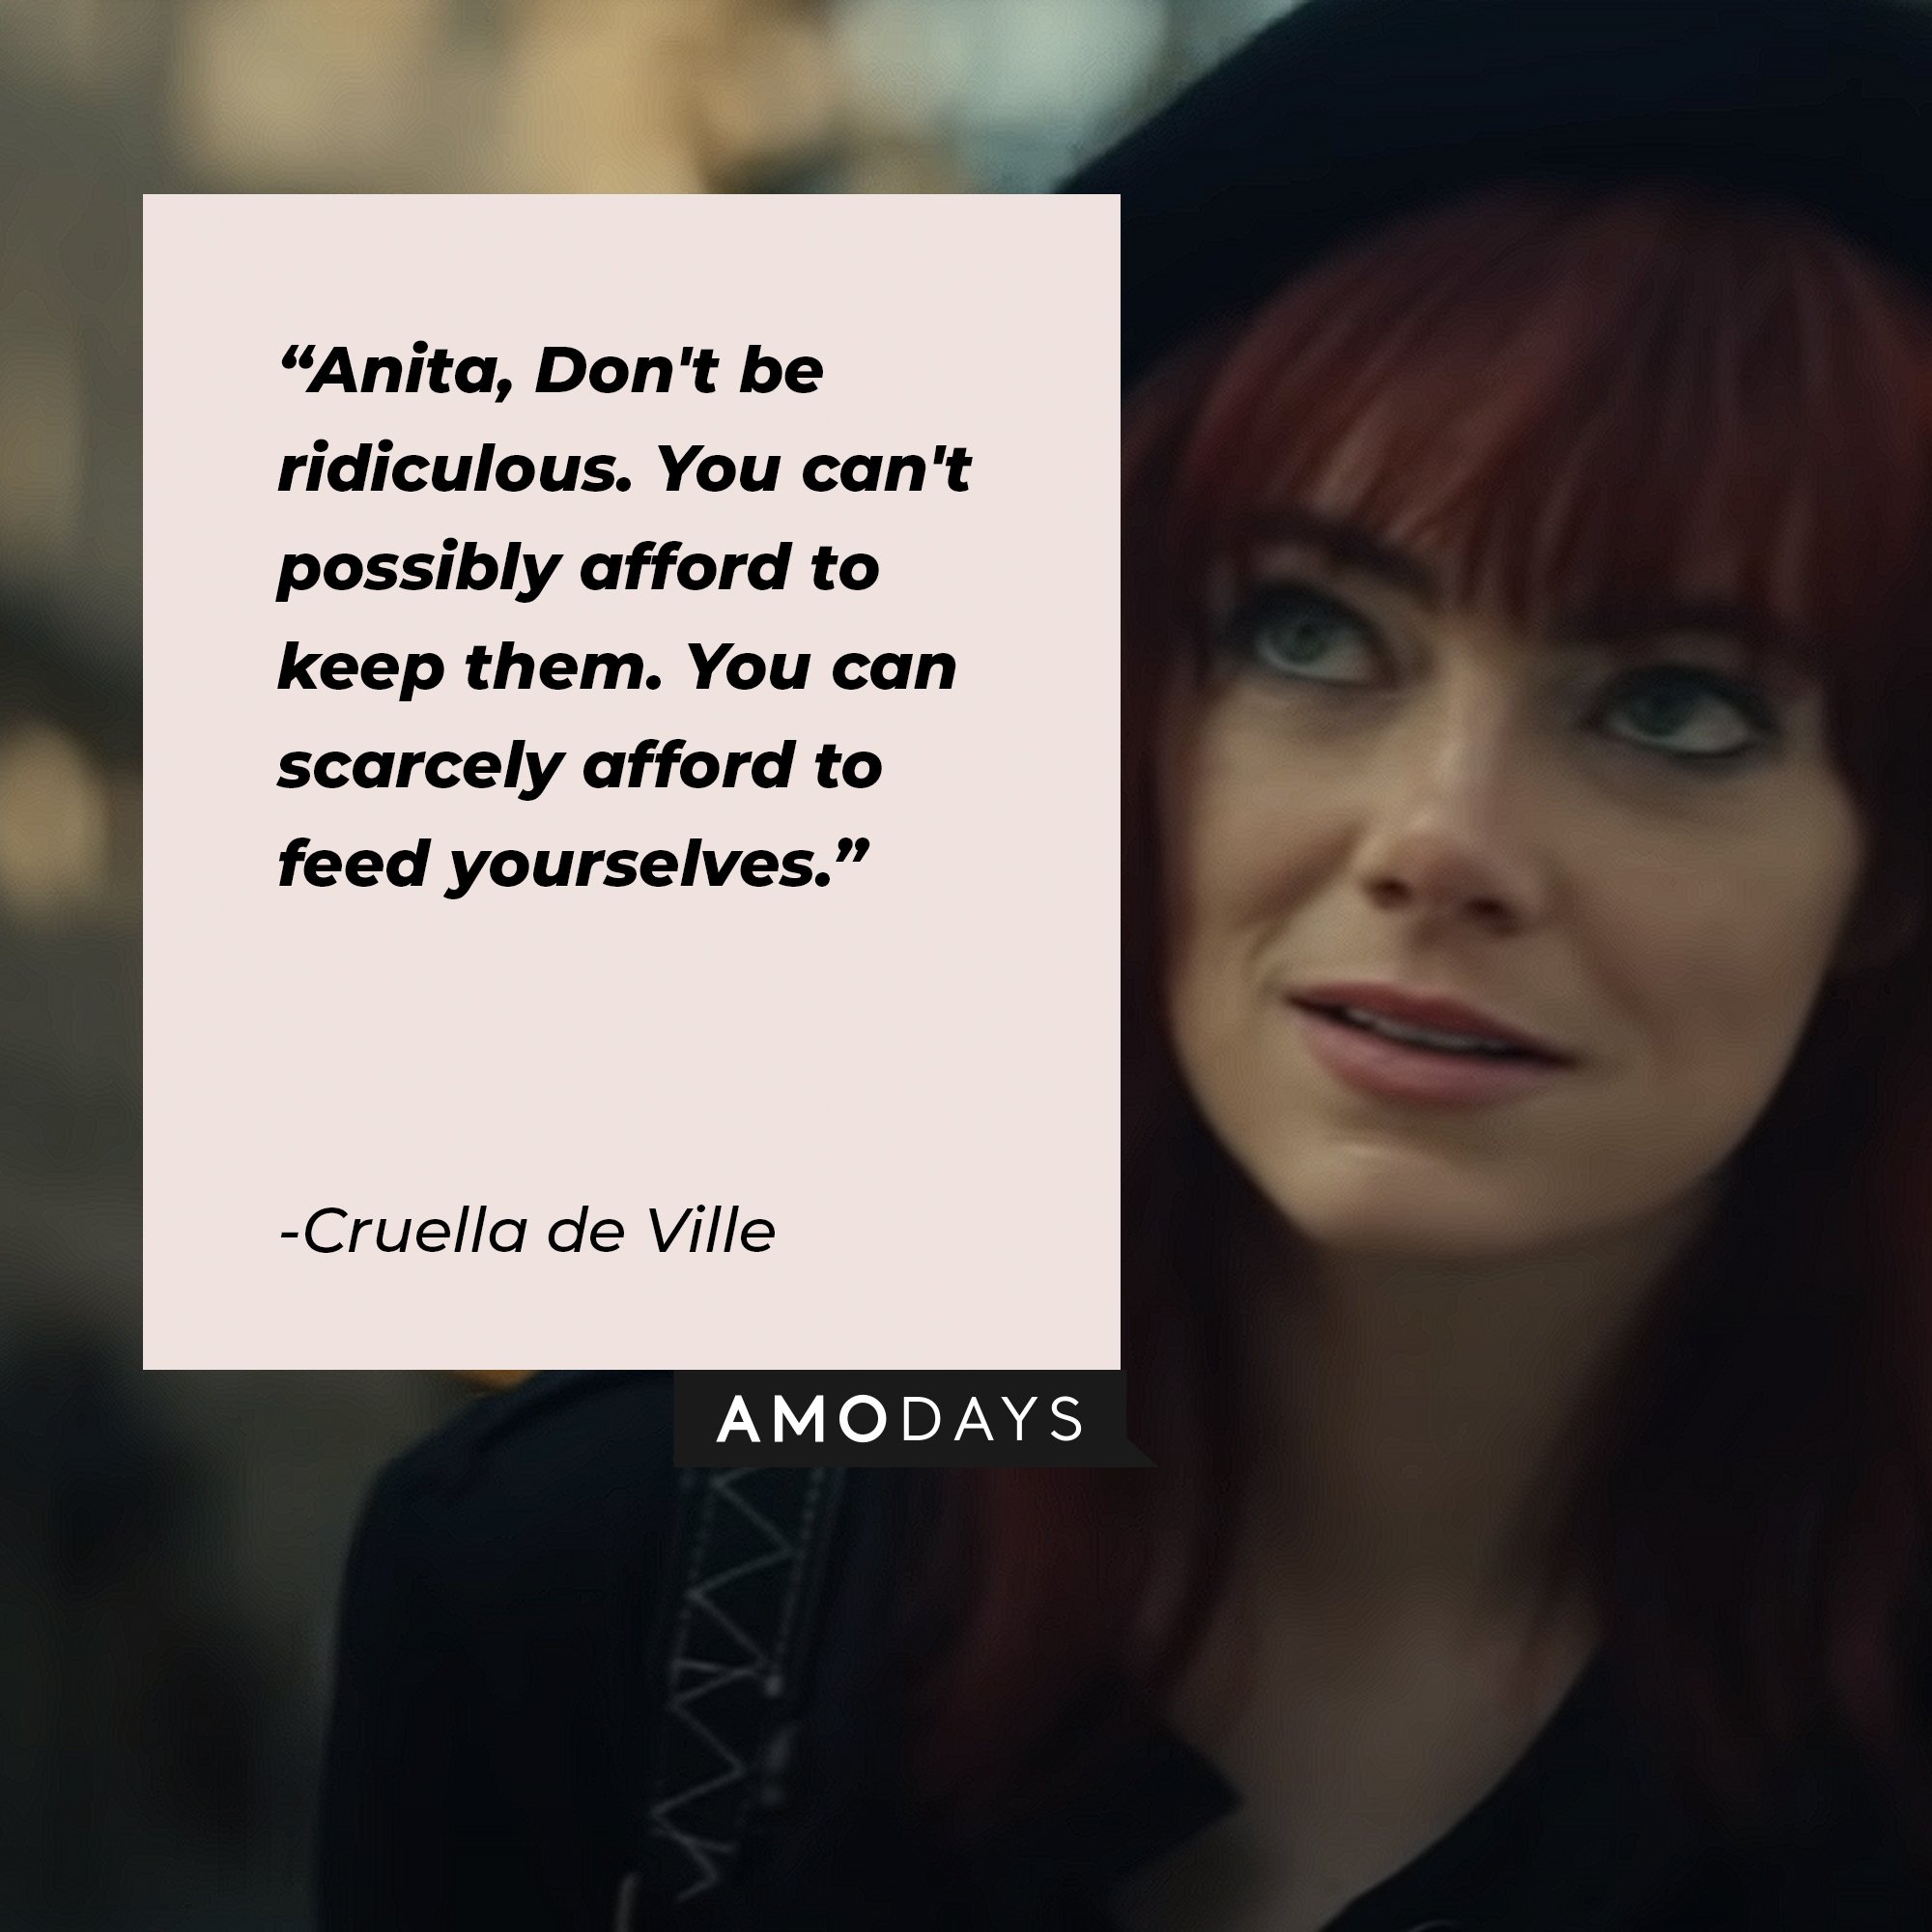 Cruella de Ville’s quote: "Anita, don't be ridiculous. You can't possibly afford to keep them. You can scarcely afford to feed yourselves." | Image: AmoDays